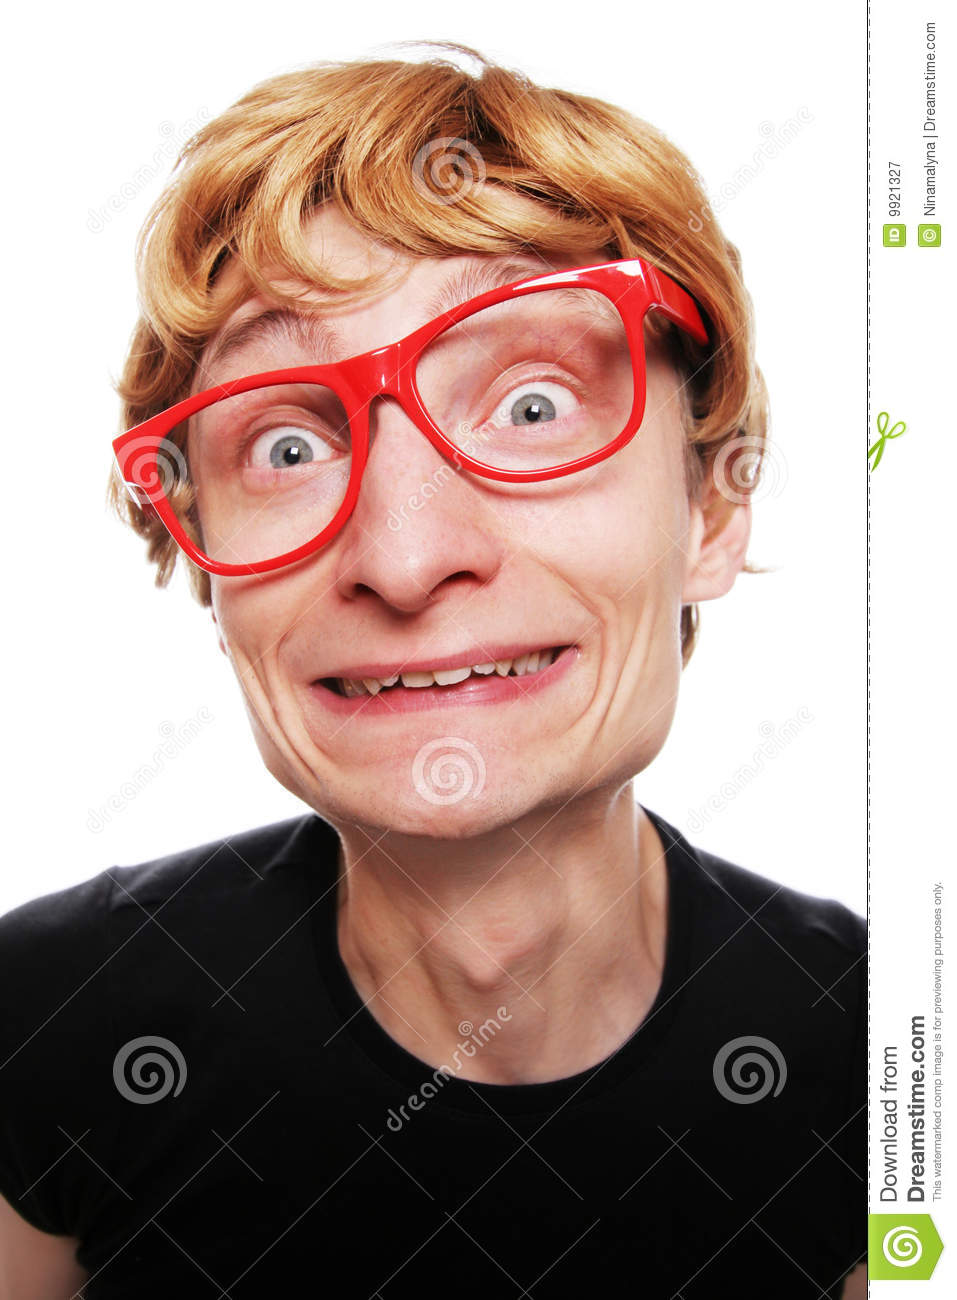 Funny Guy with Glasses